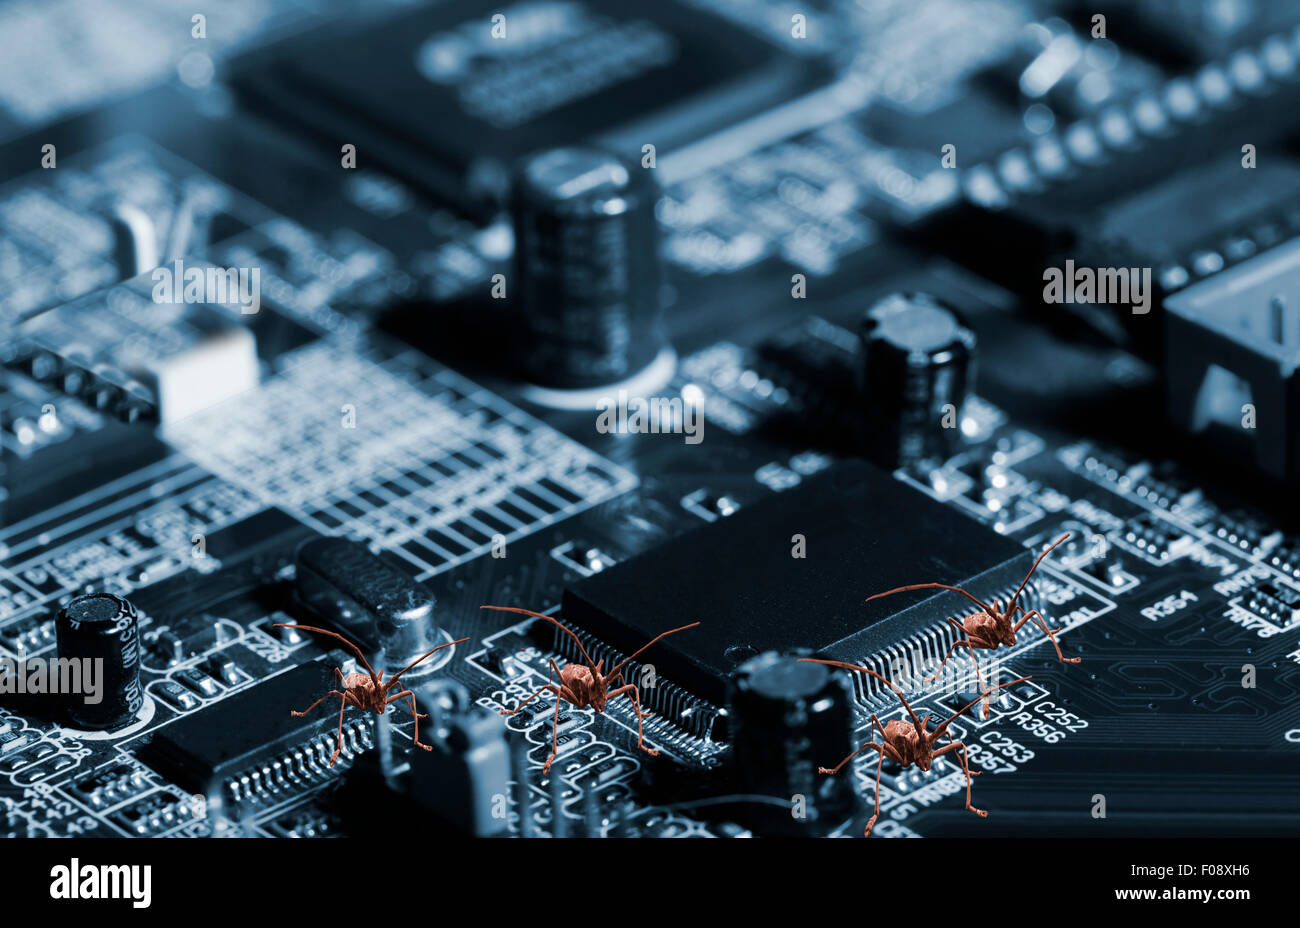 computer bugs, viruses jumping over circuit-board and microchips Stock Photo